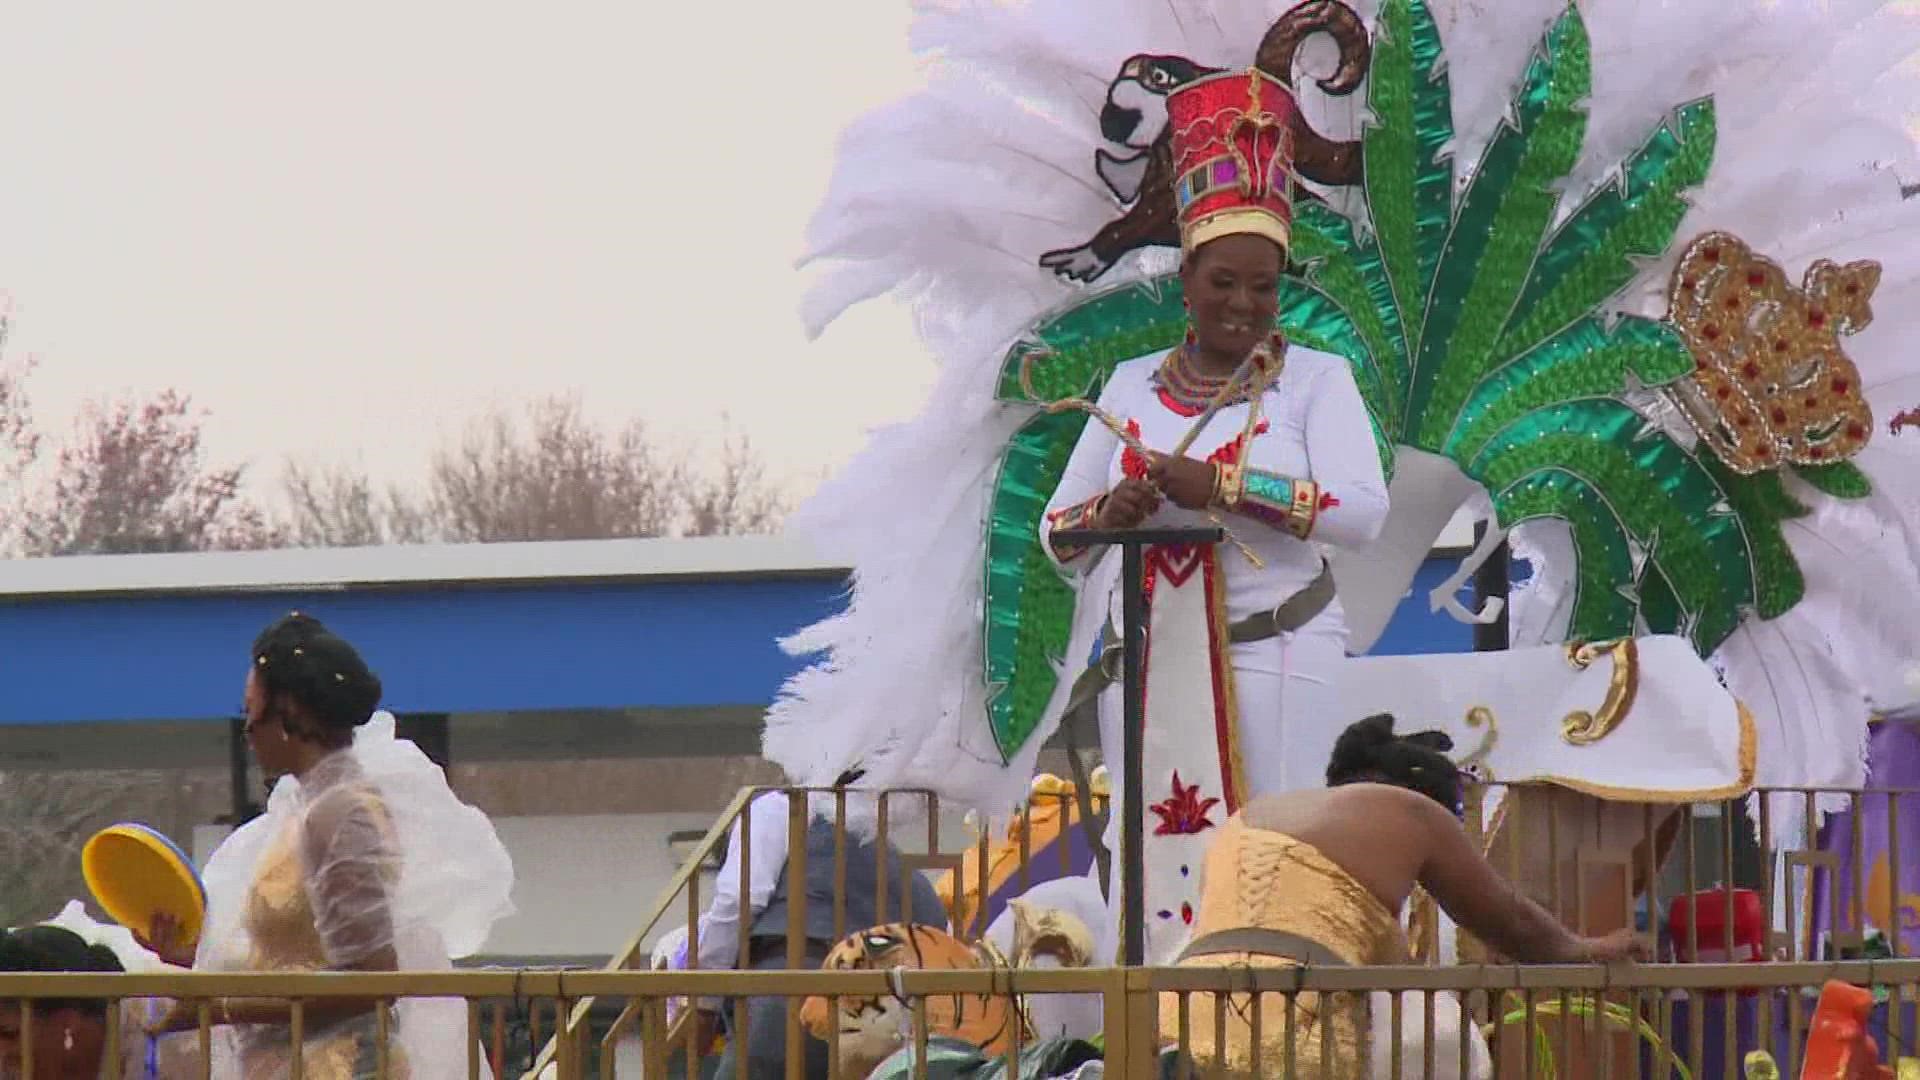 The Queen of Nefertiti, Sergeant Summer Turner traded her NOPD uniform for a custom-made gown draped in jewels to ride in the parade.